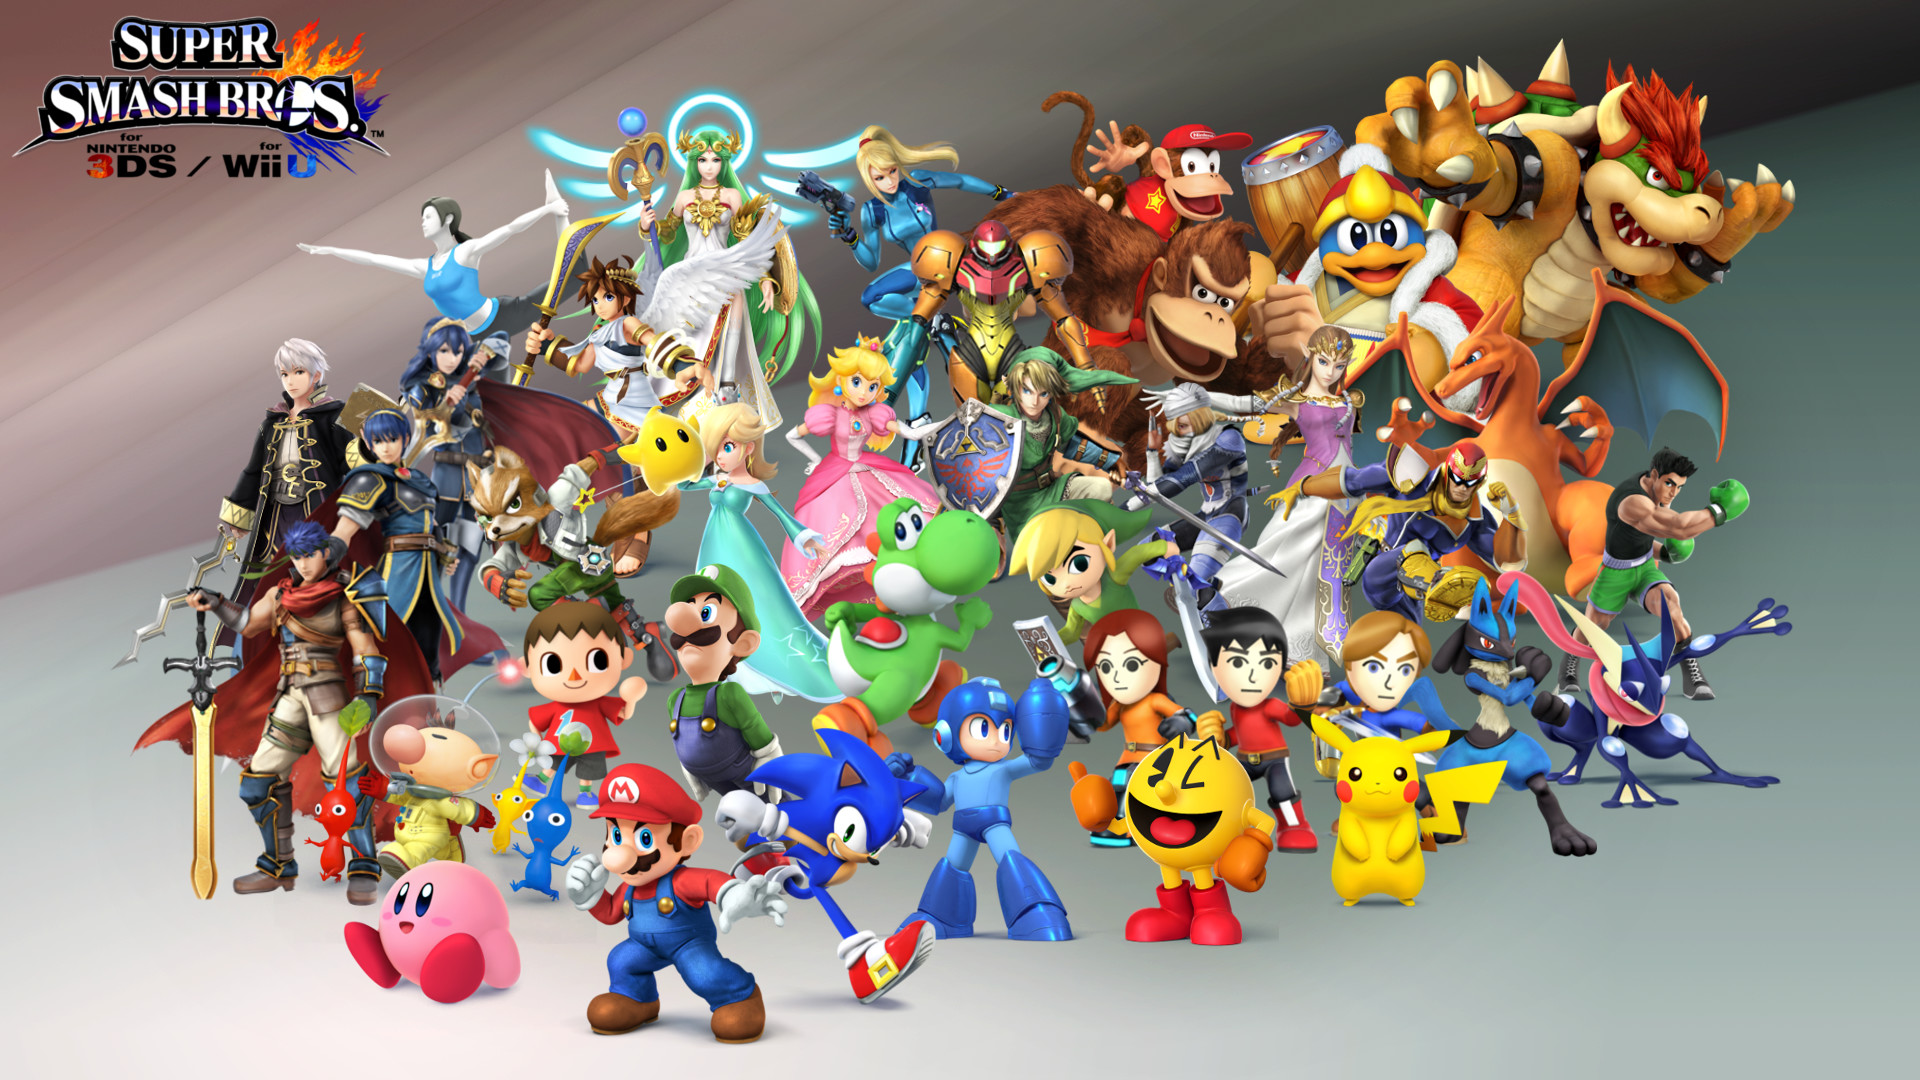 1920x1080 SSB4Made a 1920 x 1080 Smash Bros 4 wallpaper featuring every character  confirmed so far. Will update as the remaining characters are revealed.